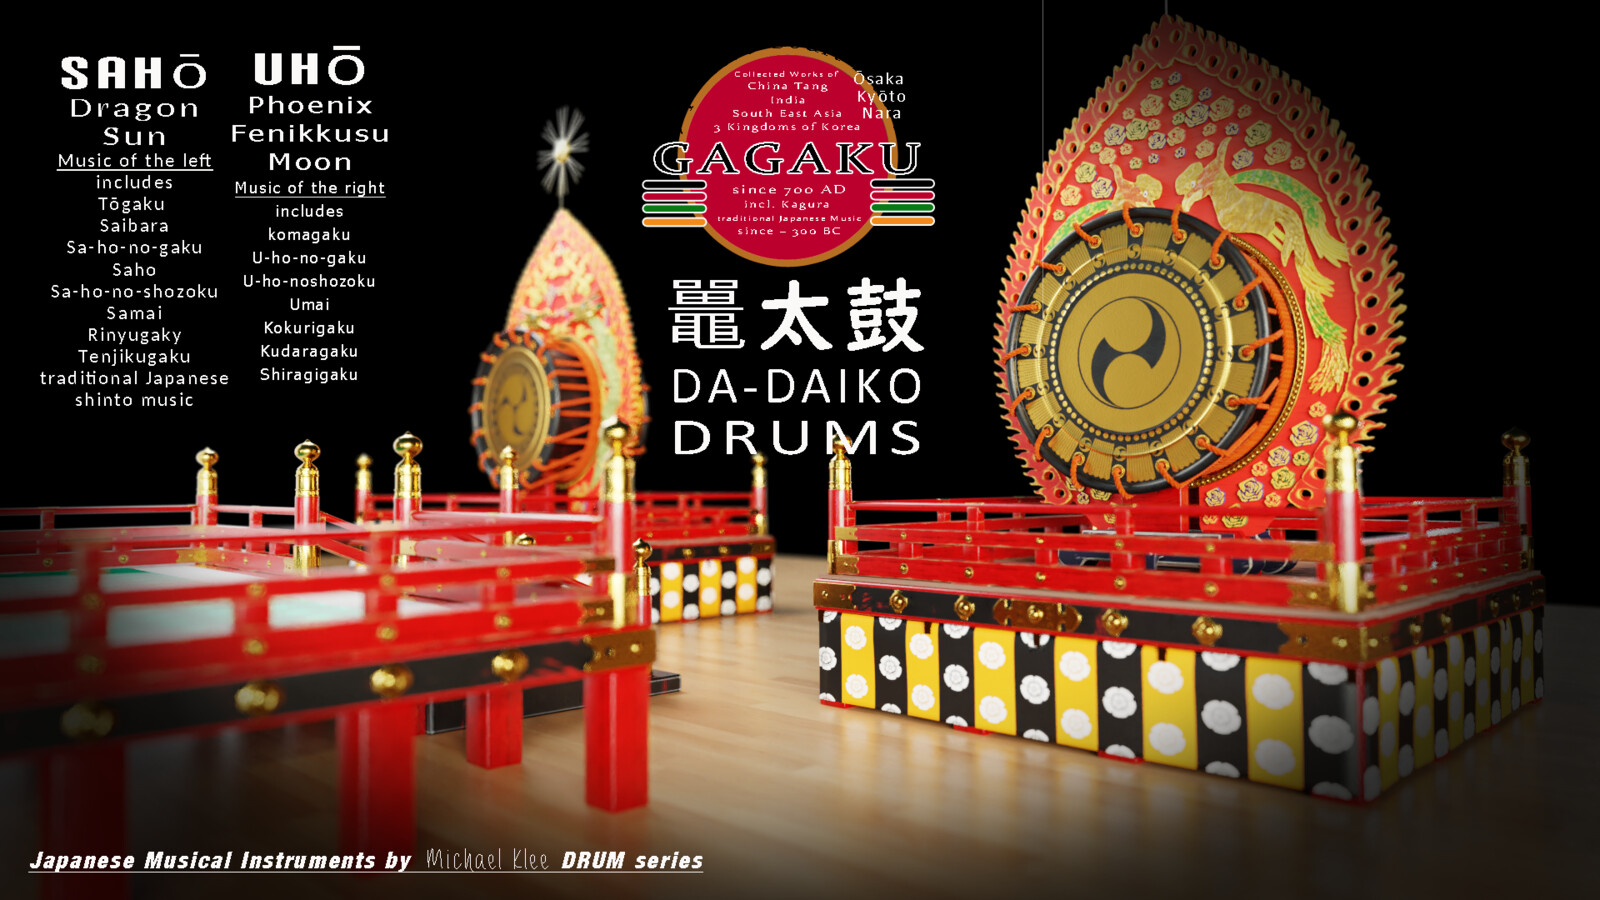 Da-daiko 鼉太鼓 Japanese giant drums for the gagaku 雅楽 court music - side view